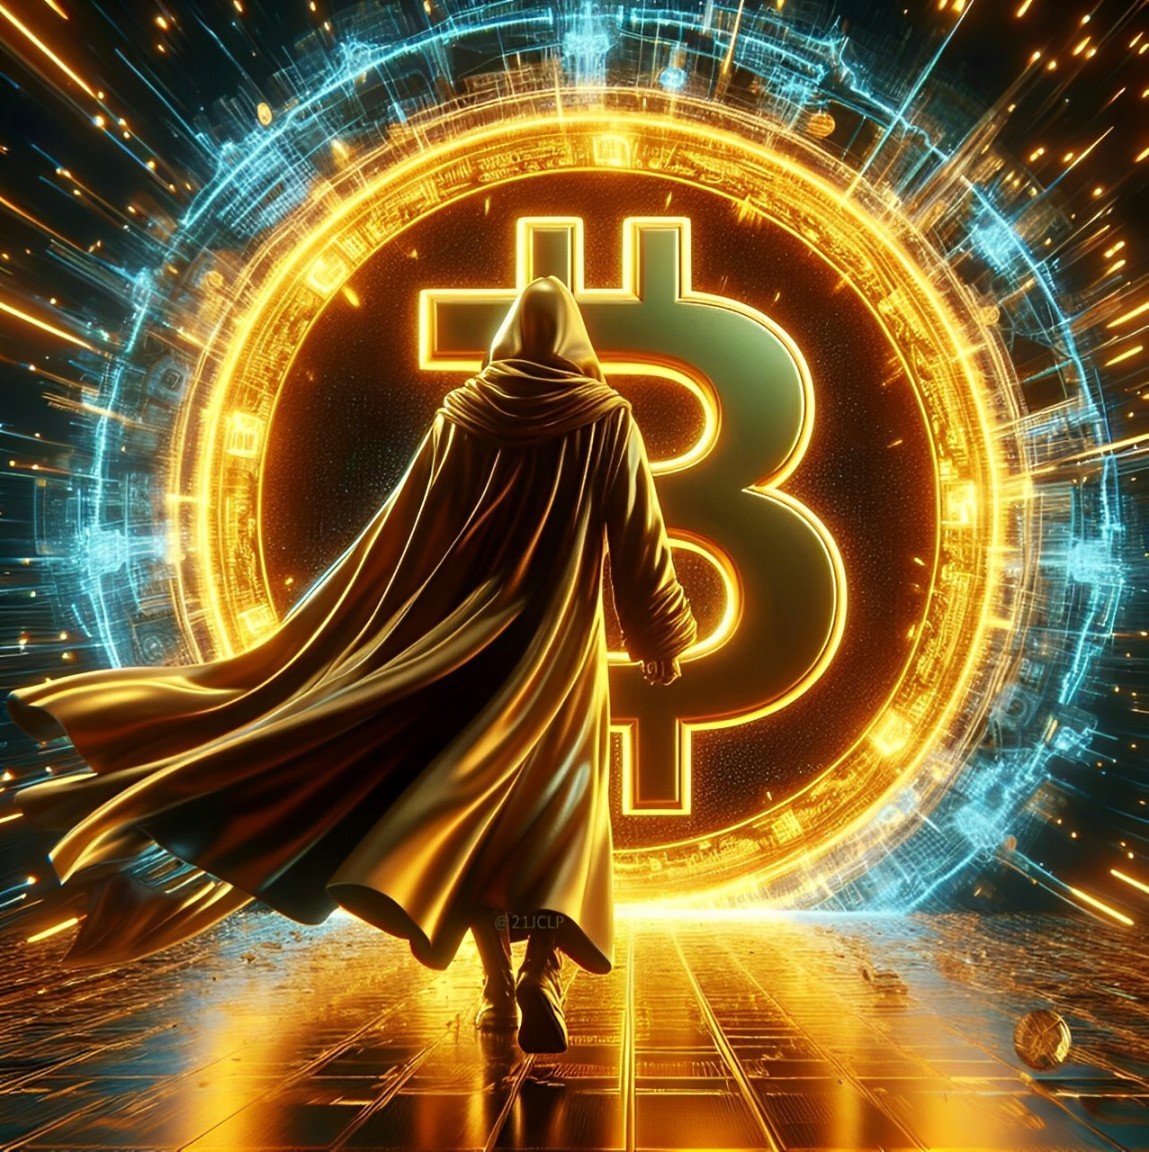 Bitcoin Price Prediction: BTC Soars 10% As Morgan Stanley Mulls Offering Bitcoin ETFs To Customers – Too Late To Buy?